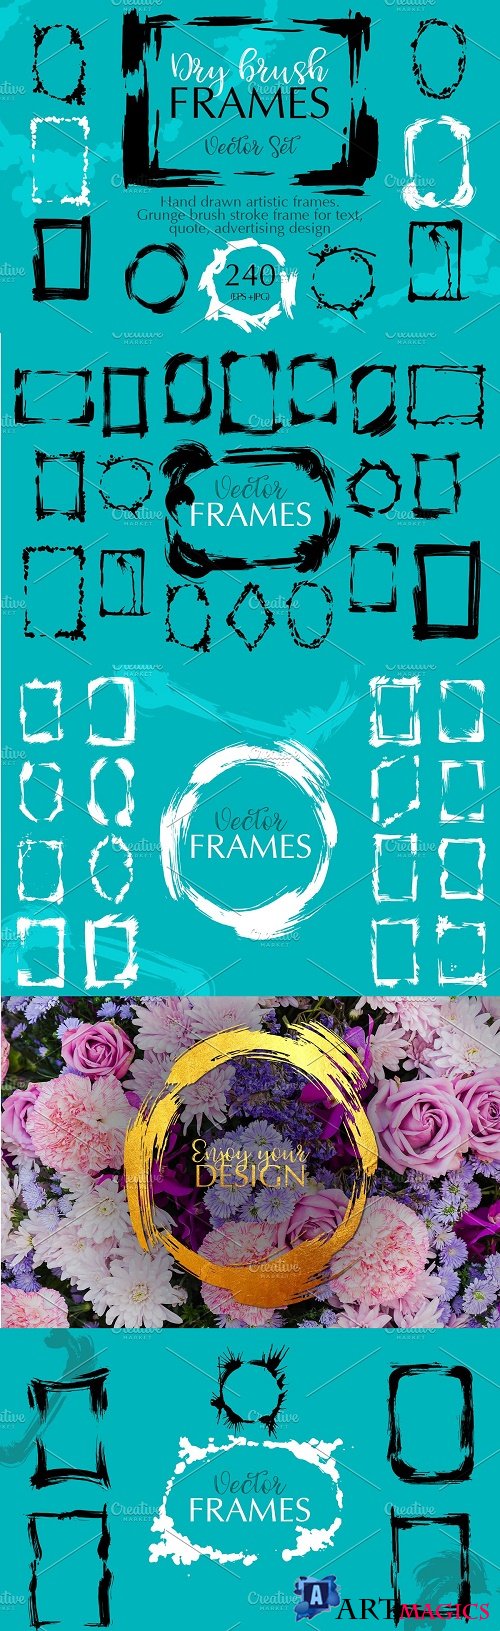 Dry brush frames vector collection - 3634652